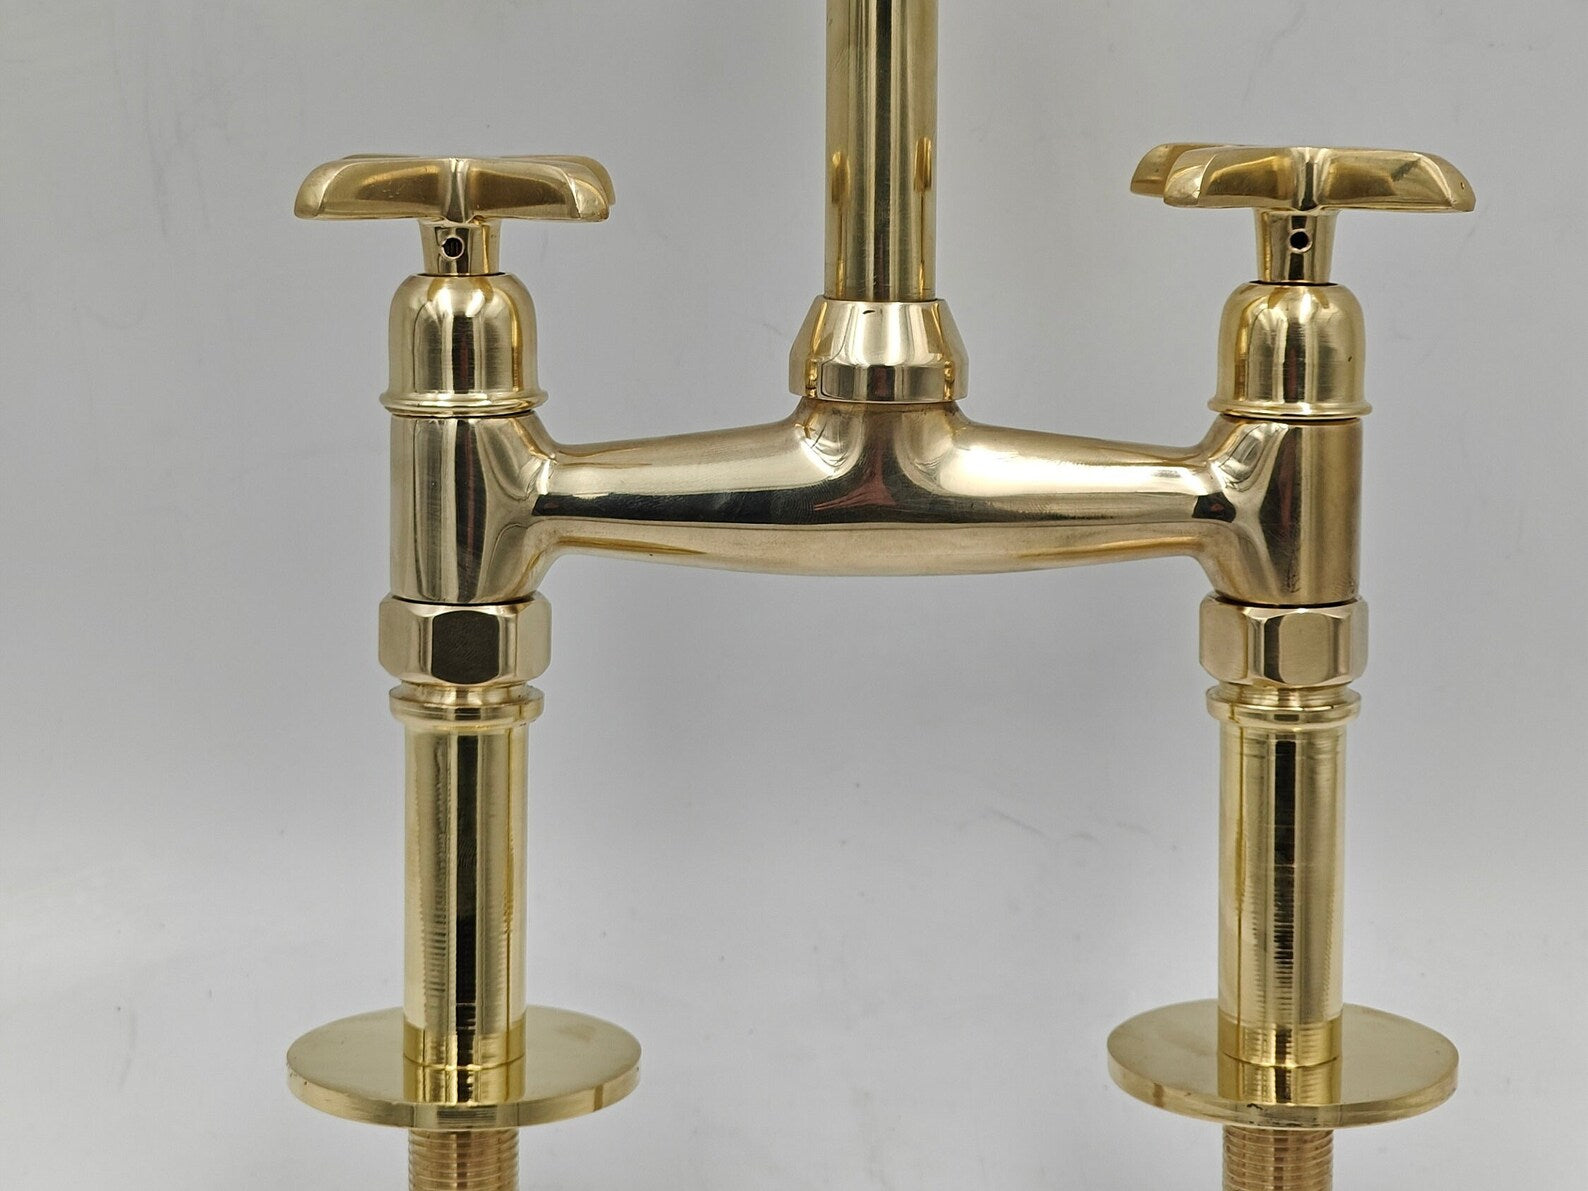 Solid Brass Kitchen Sink Faucet - Vintage Kitchen Faucet In Unlacquered Brass